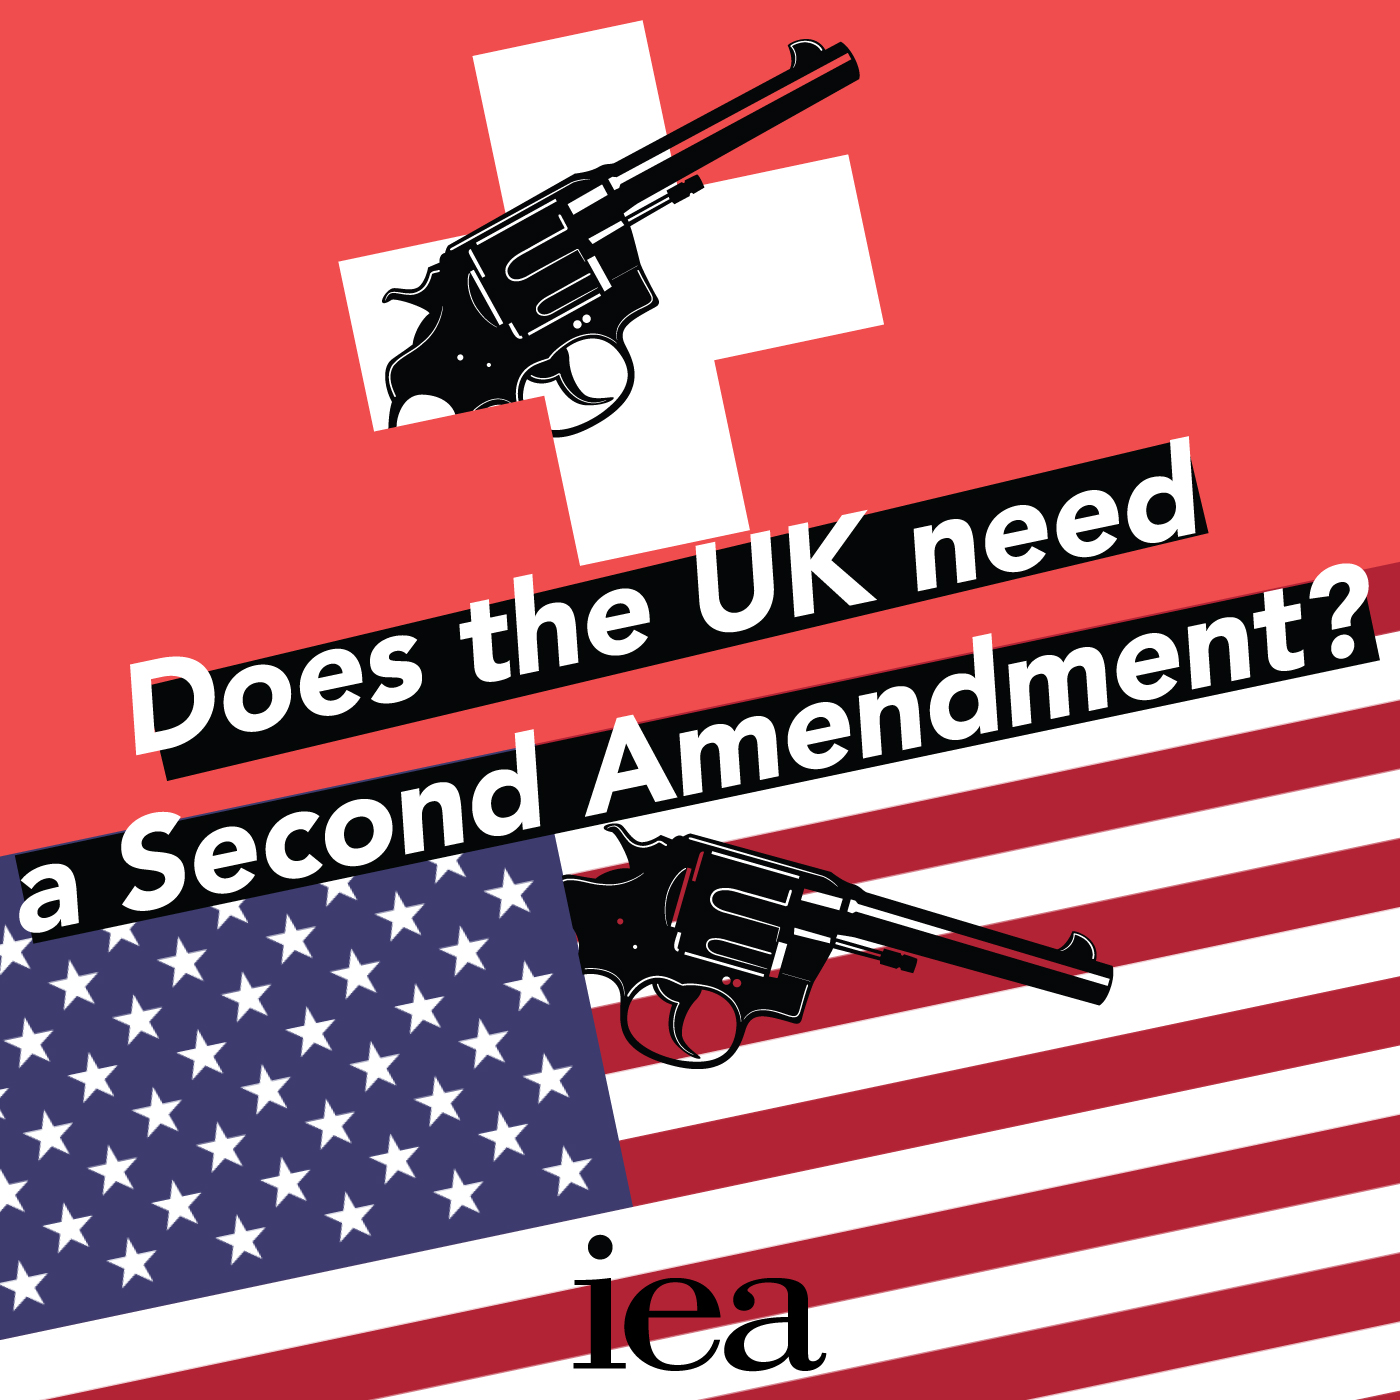 Does the UK need a Second Amendment?